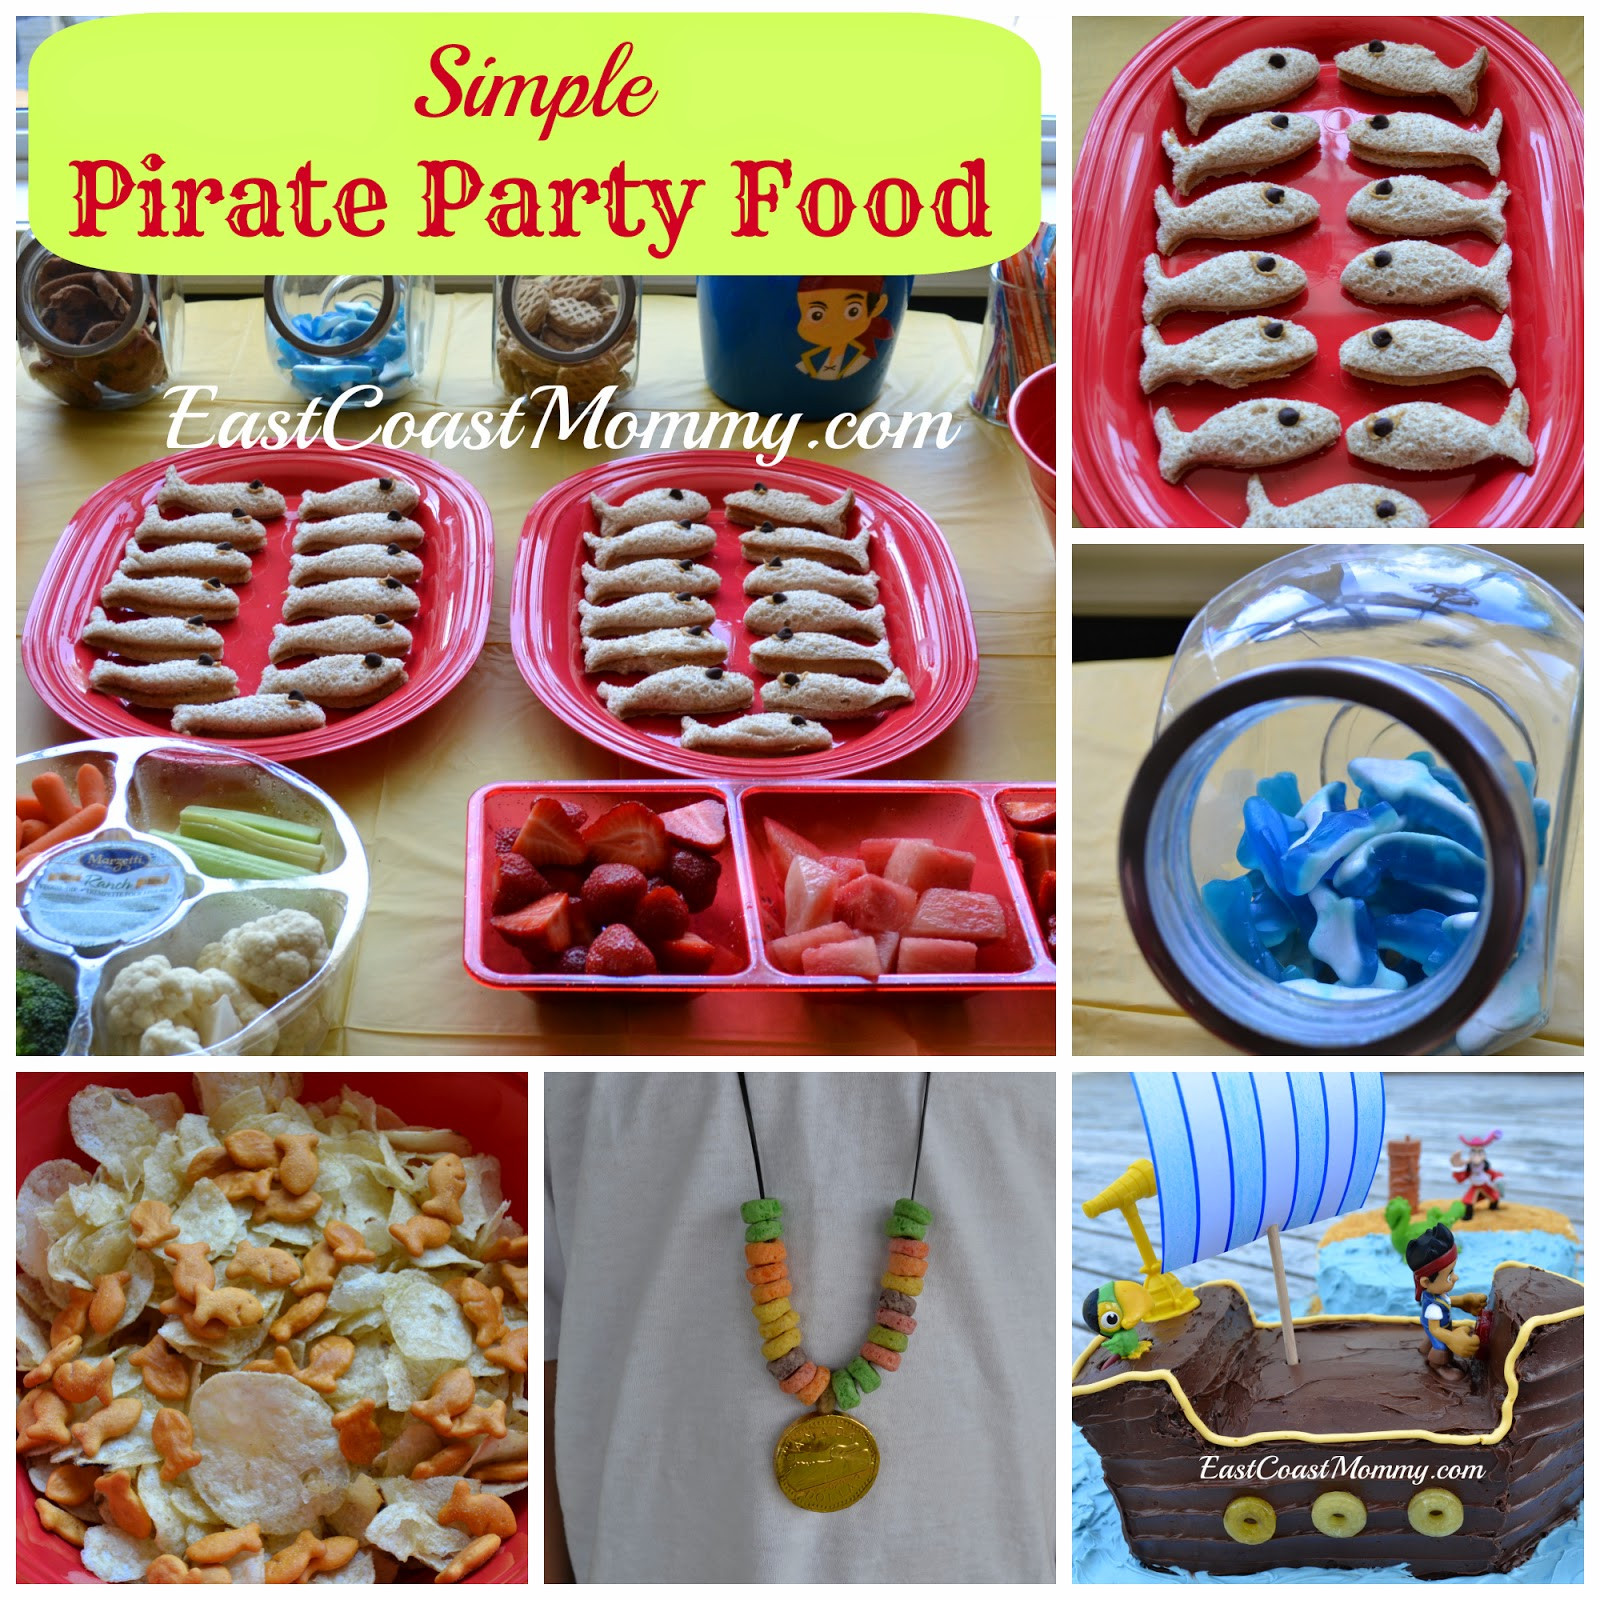 Jake And The Neverland Pirates Birthday Party Food Ideas
 East Coast Mommy Jake and the Neverland Pirates Party Food